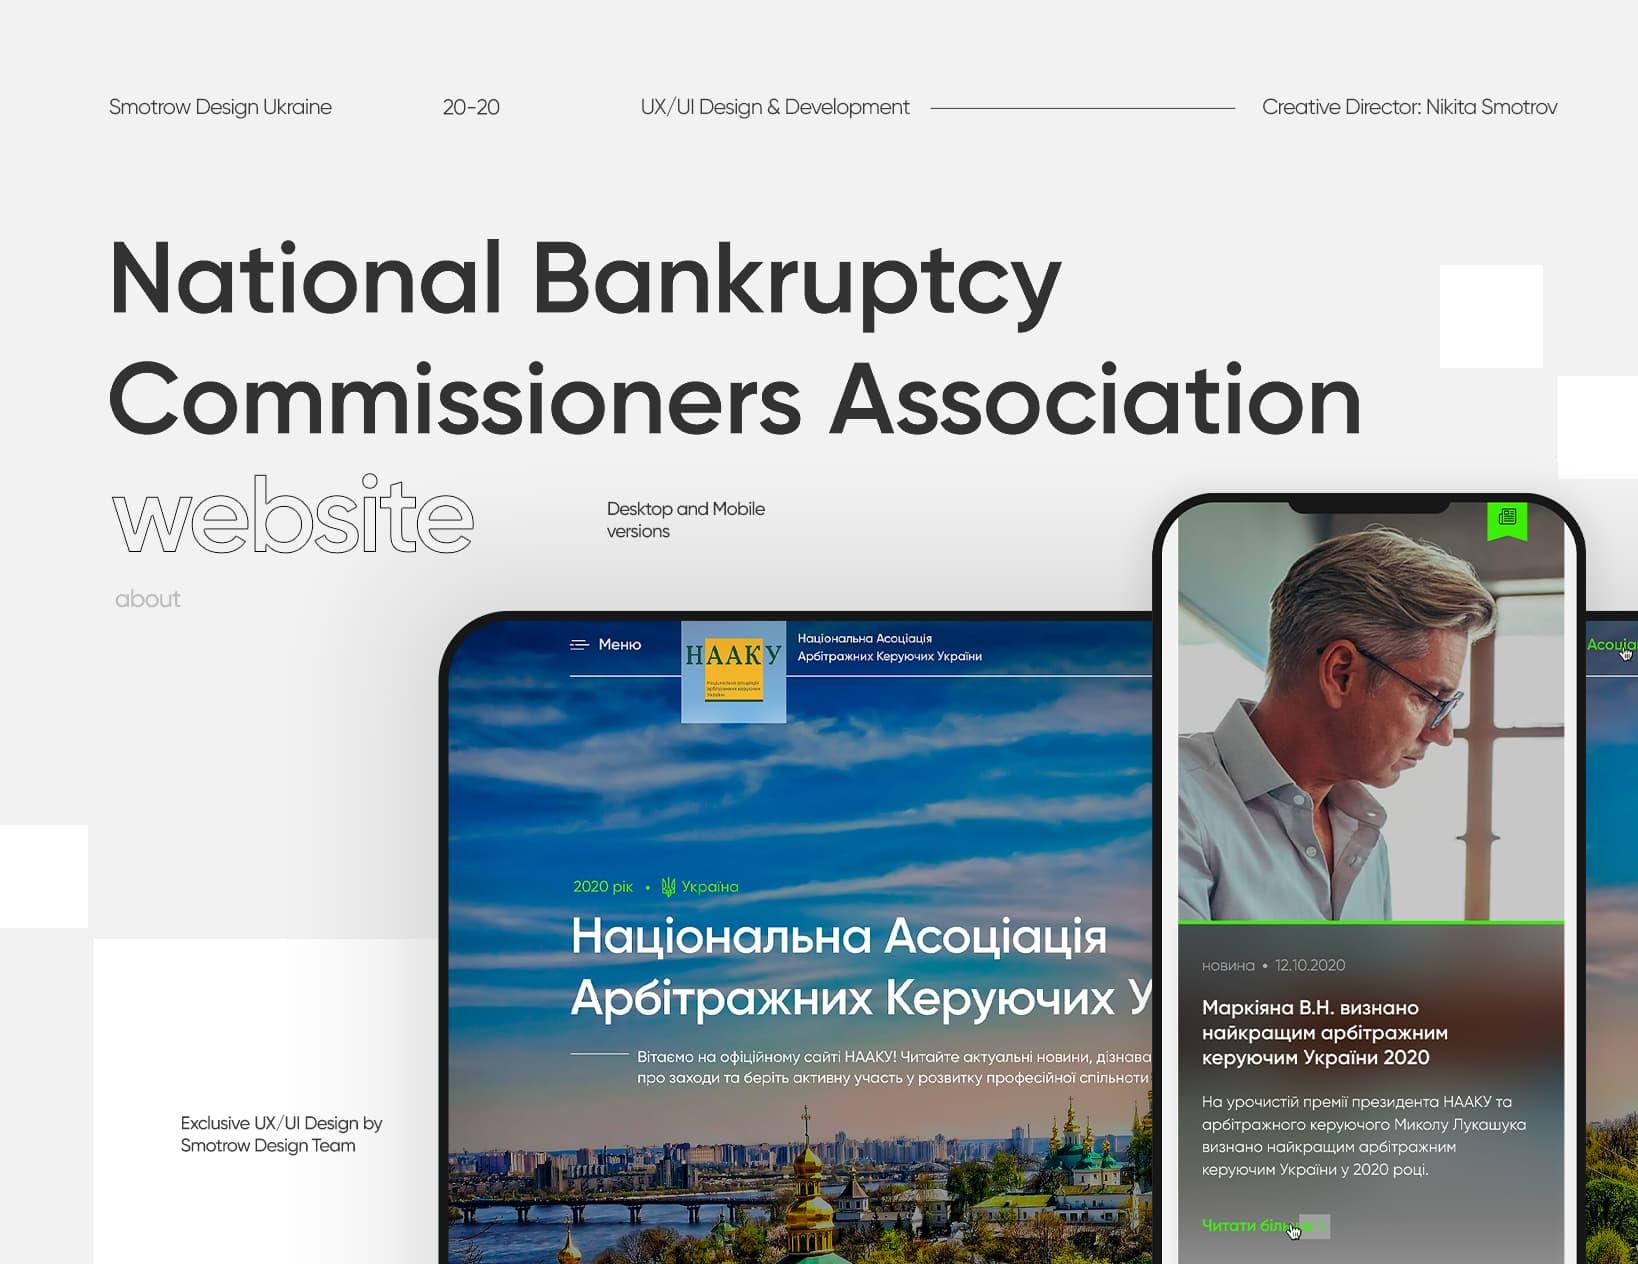 The National Bankruptcy Commissioners Association of Ukraine